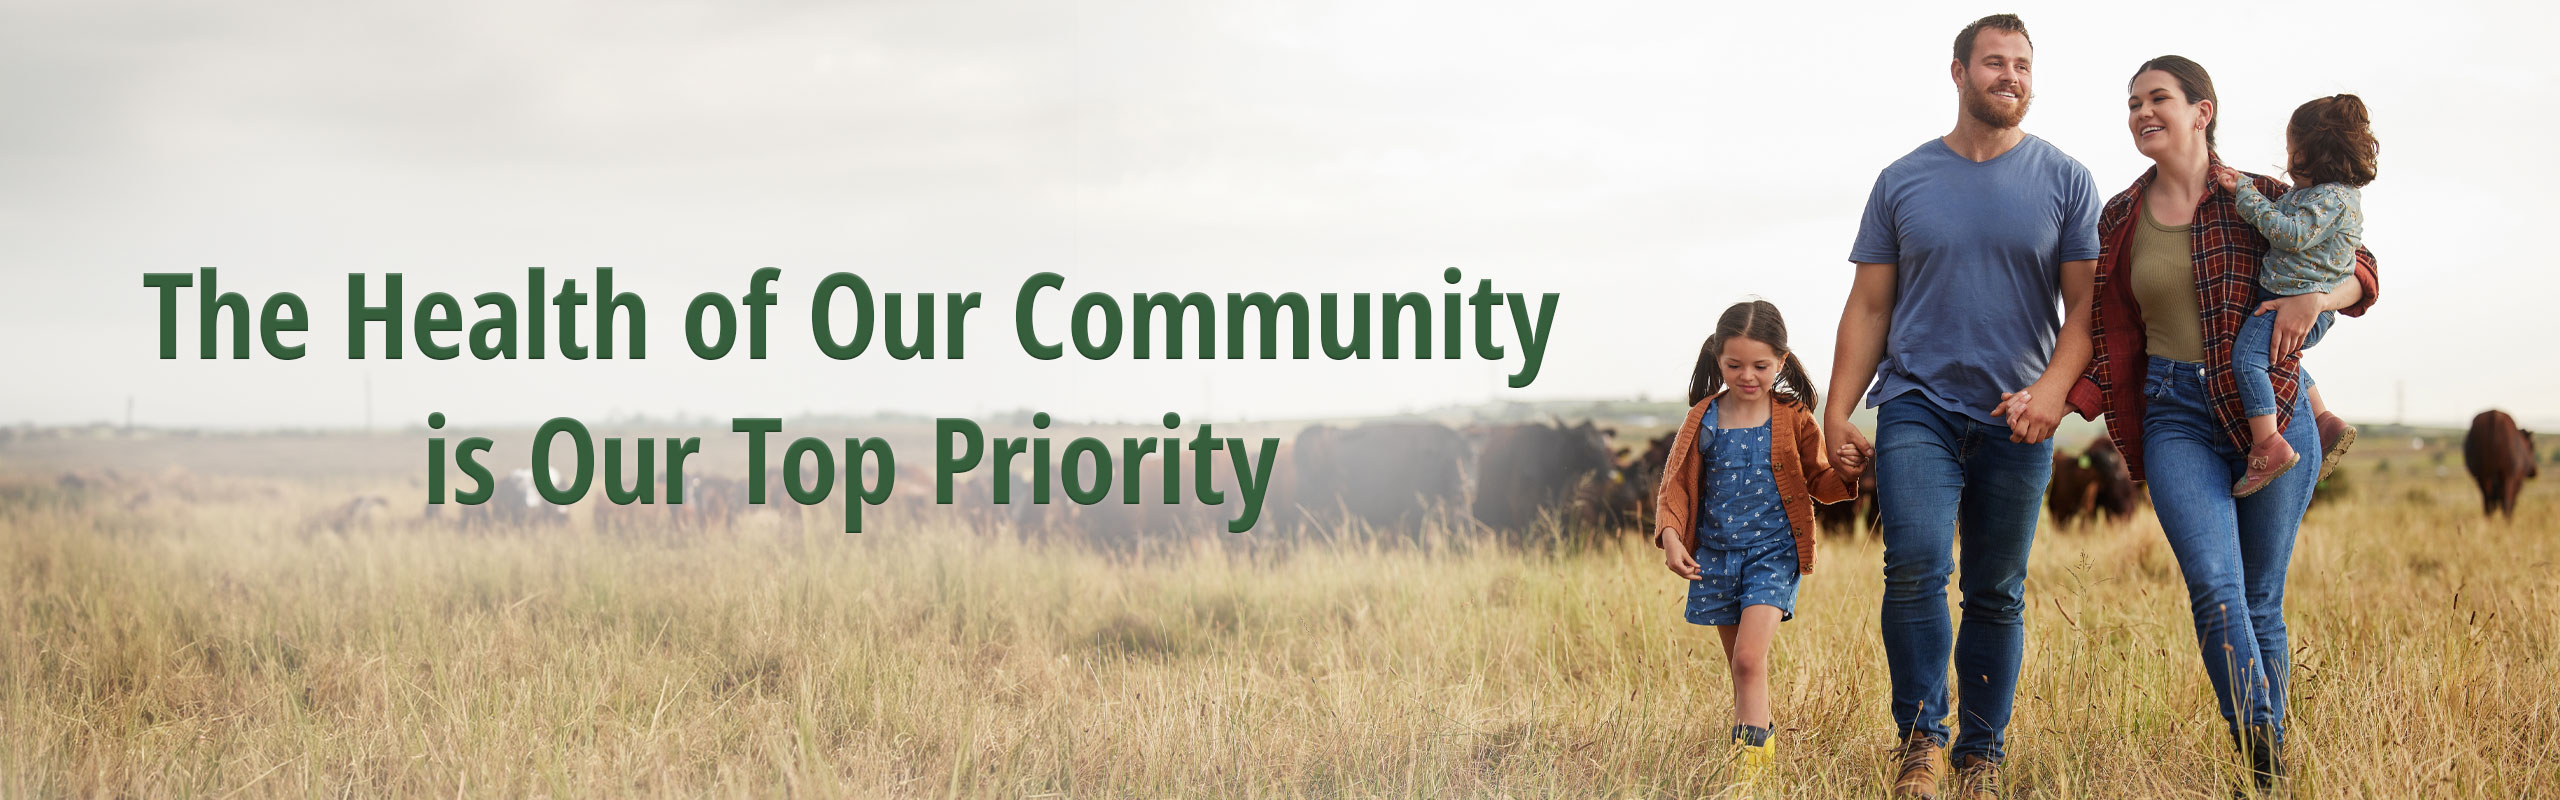 The Health of Our Community is Our Top Priority